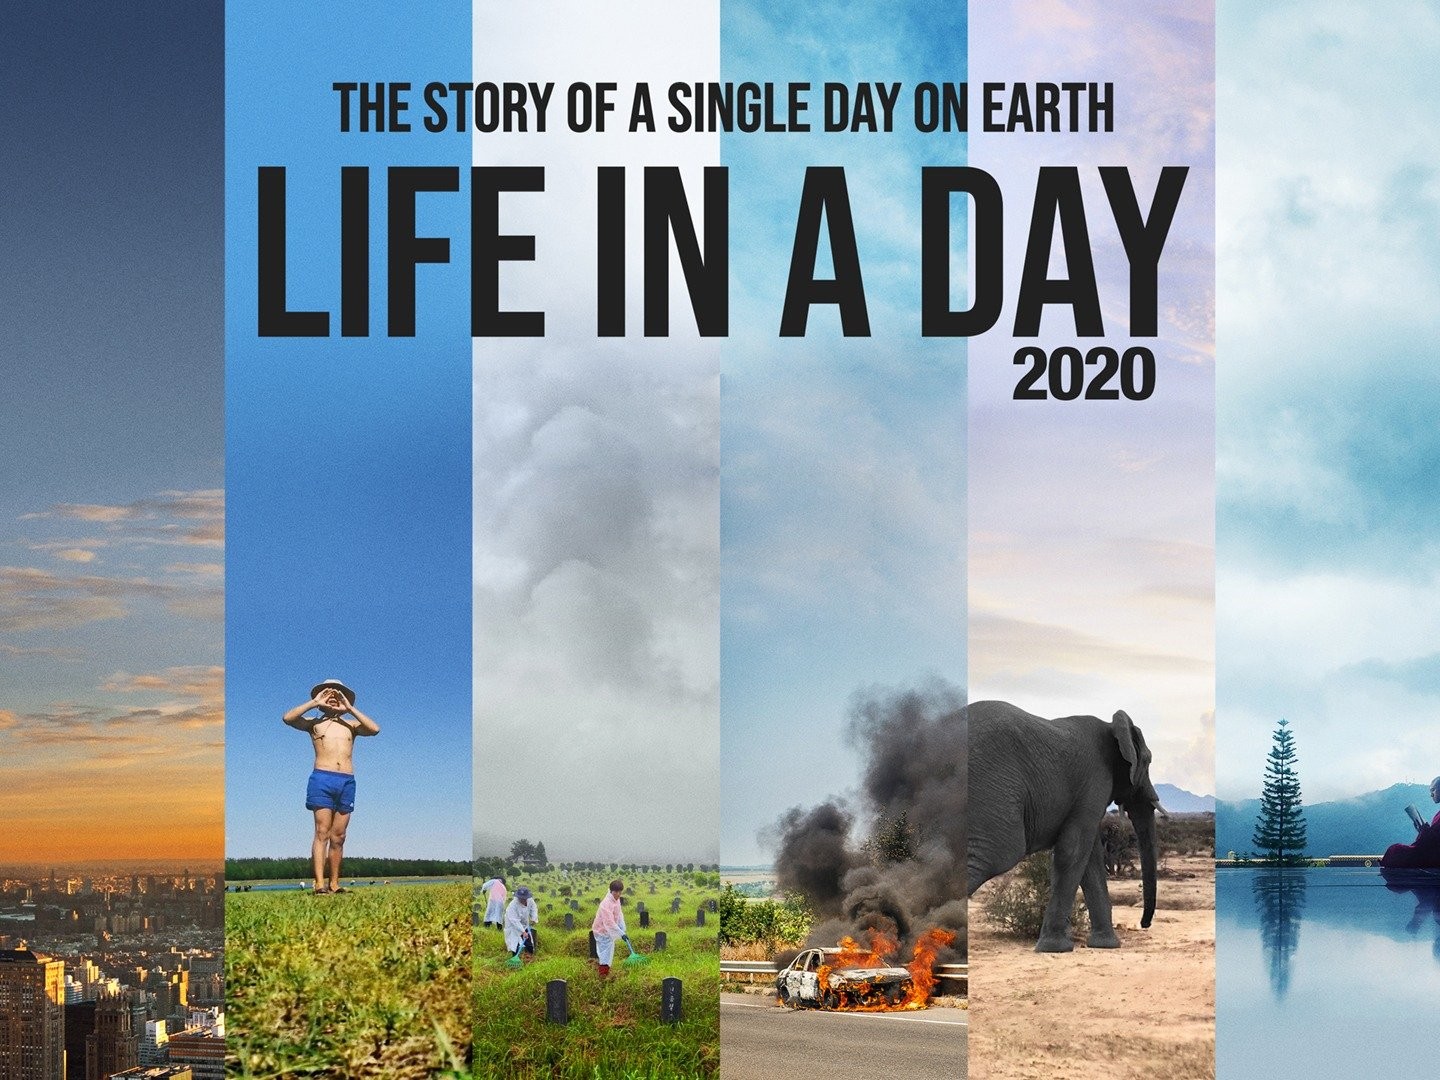 Life in a Day 2020 Documentary: Over 300,000 Submissions